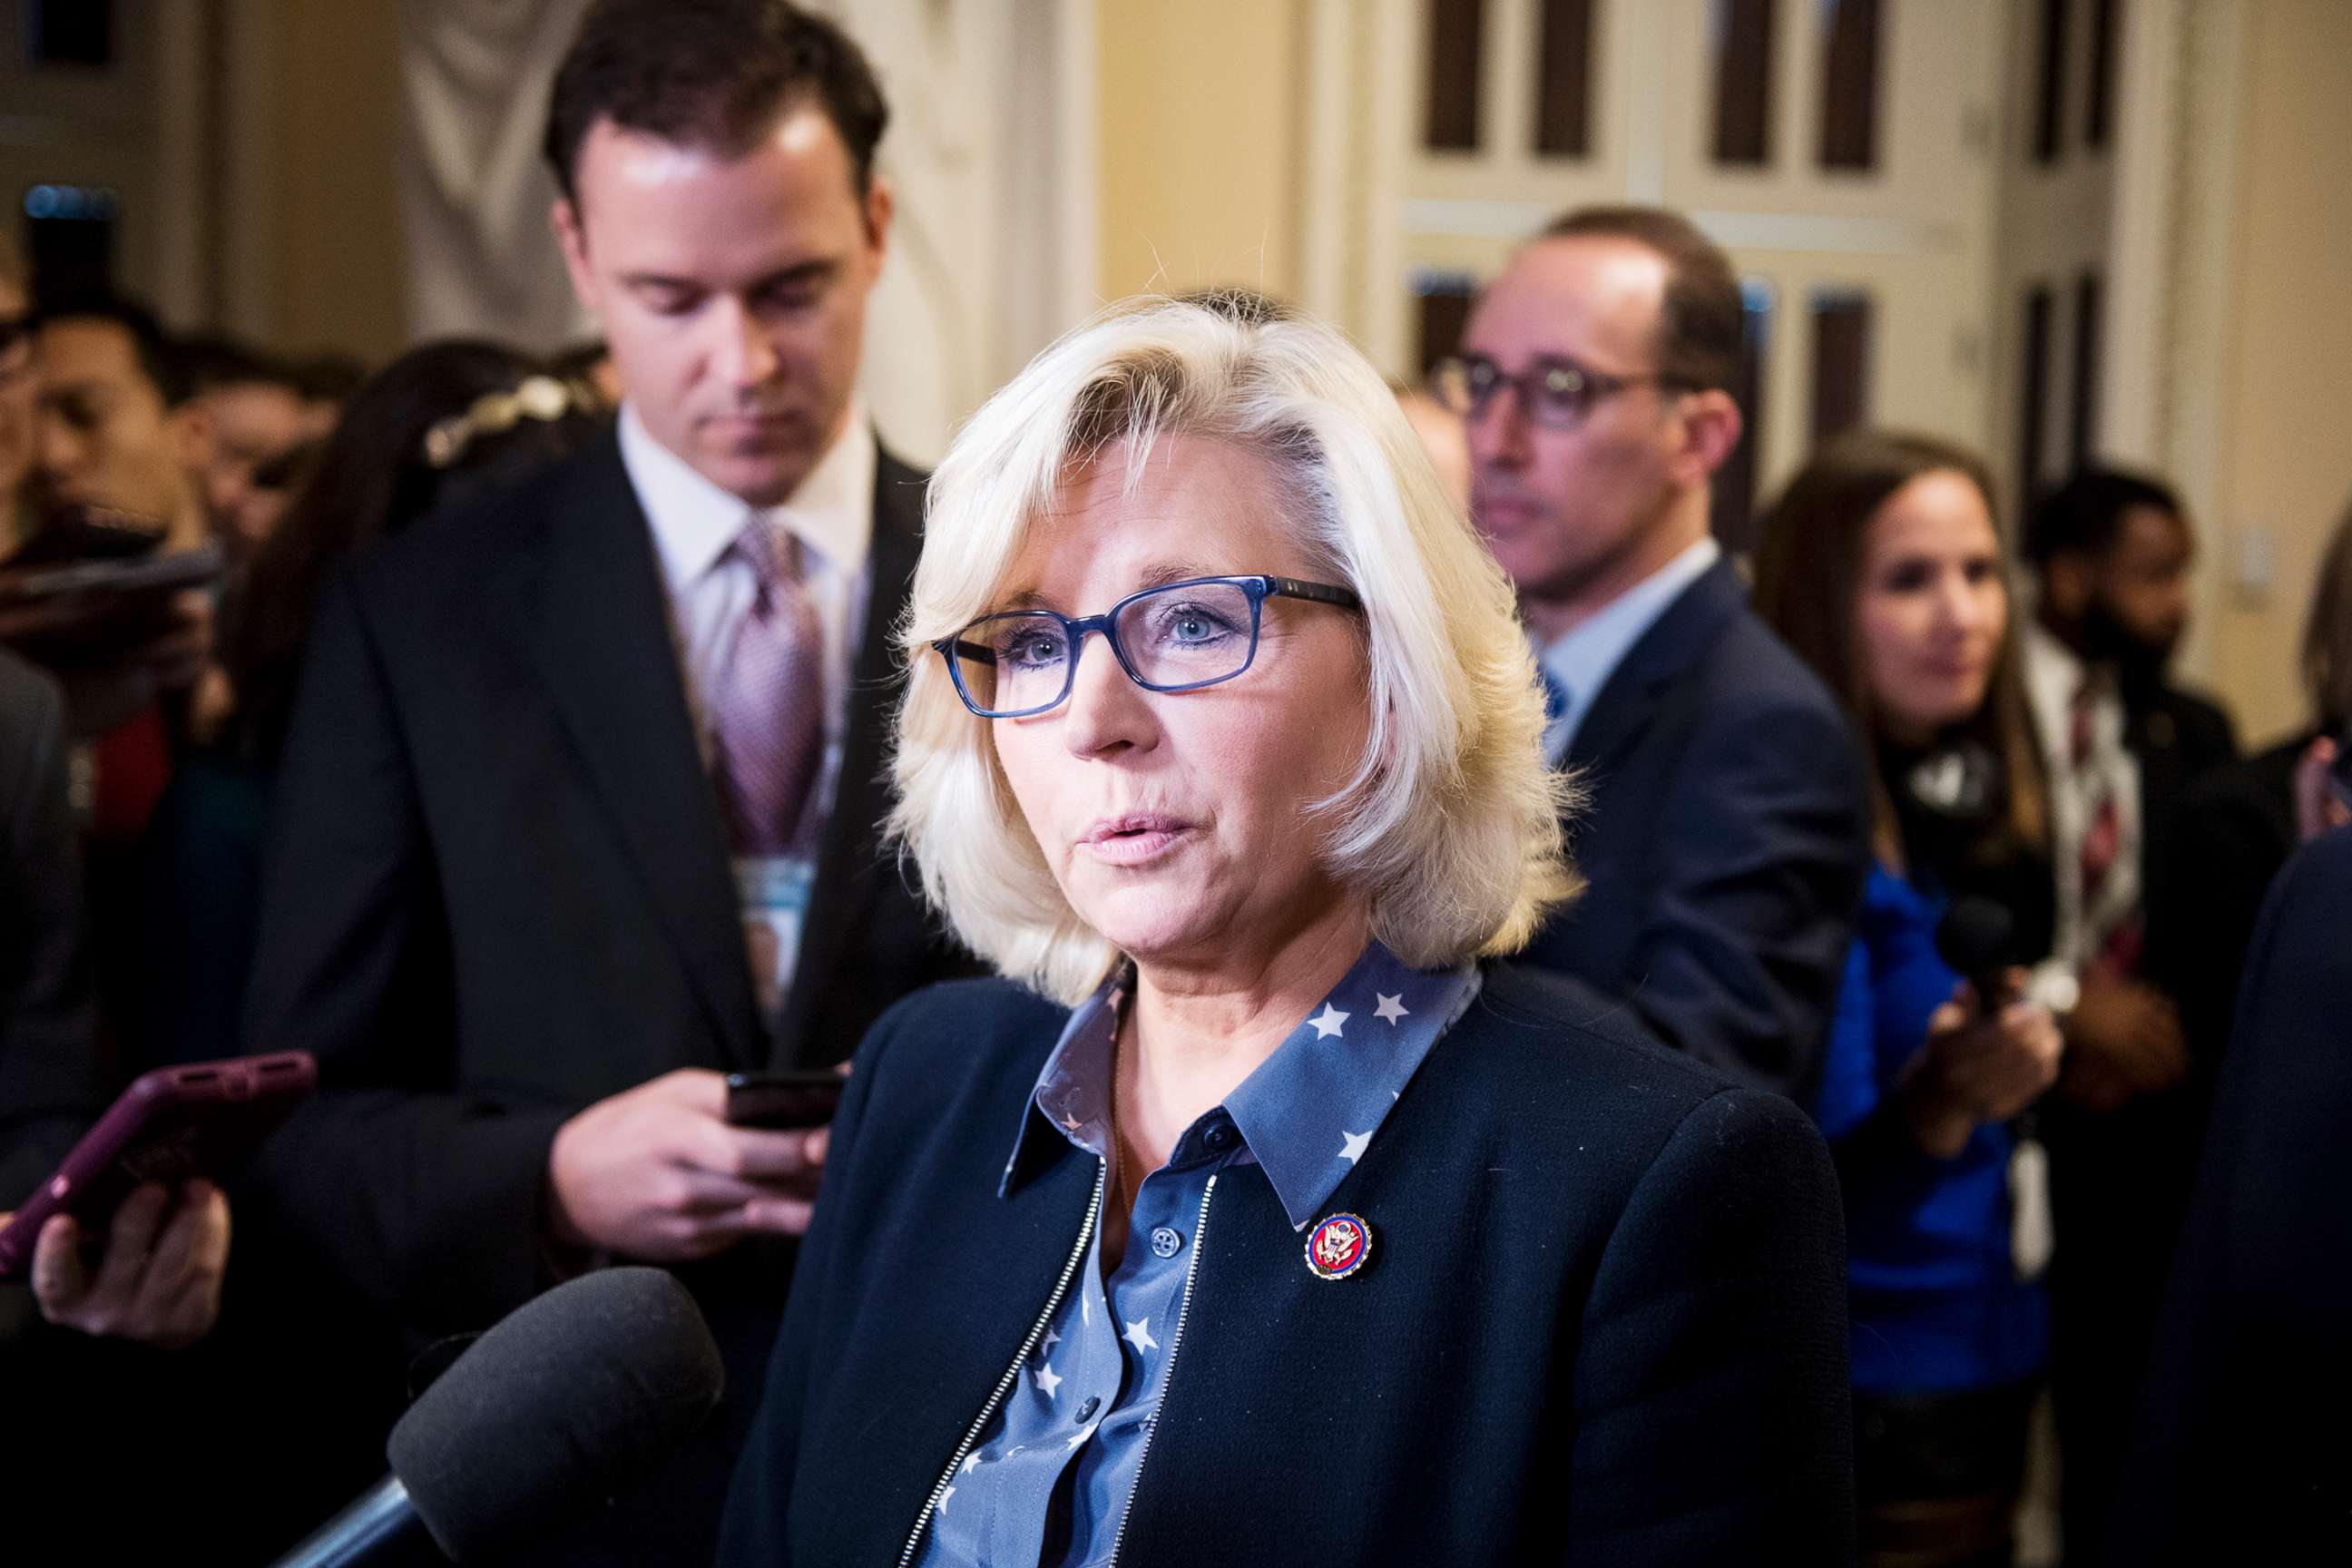 PHOTO: House Republican Conference chair Liz Cheney speaks during a press conference in the Will Rogers corridor in the Capitol, Jan. 4, 2019.